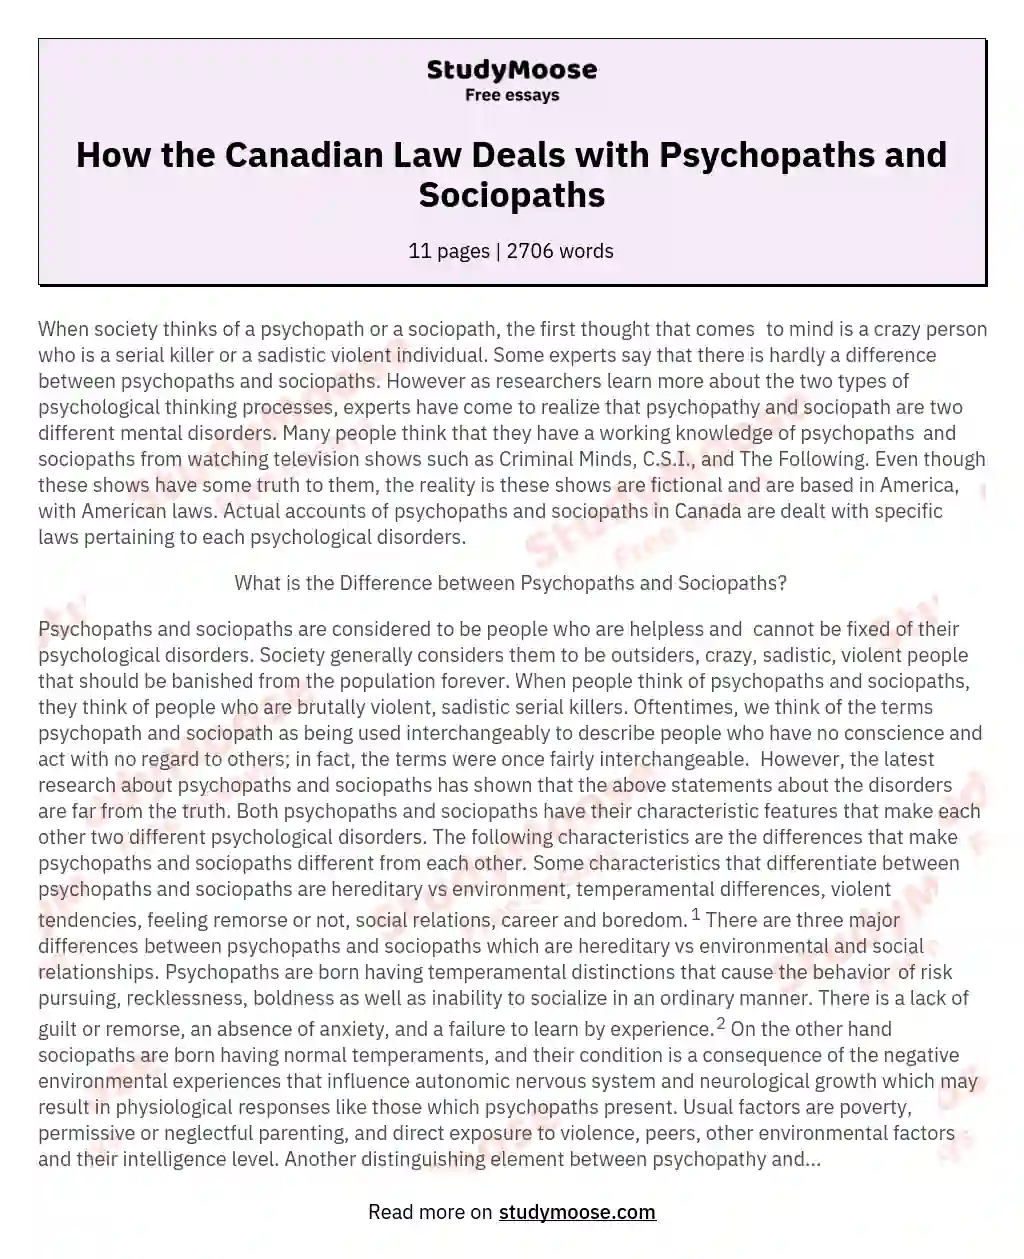 How the Canadian Law Deals with Psychopaths and Sociopaths essay